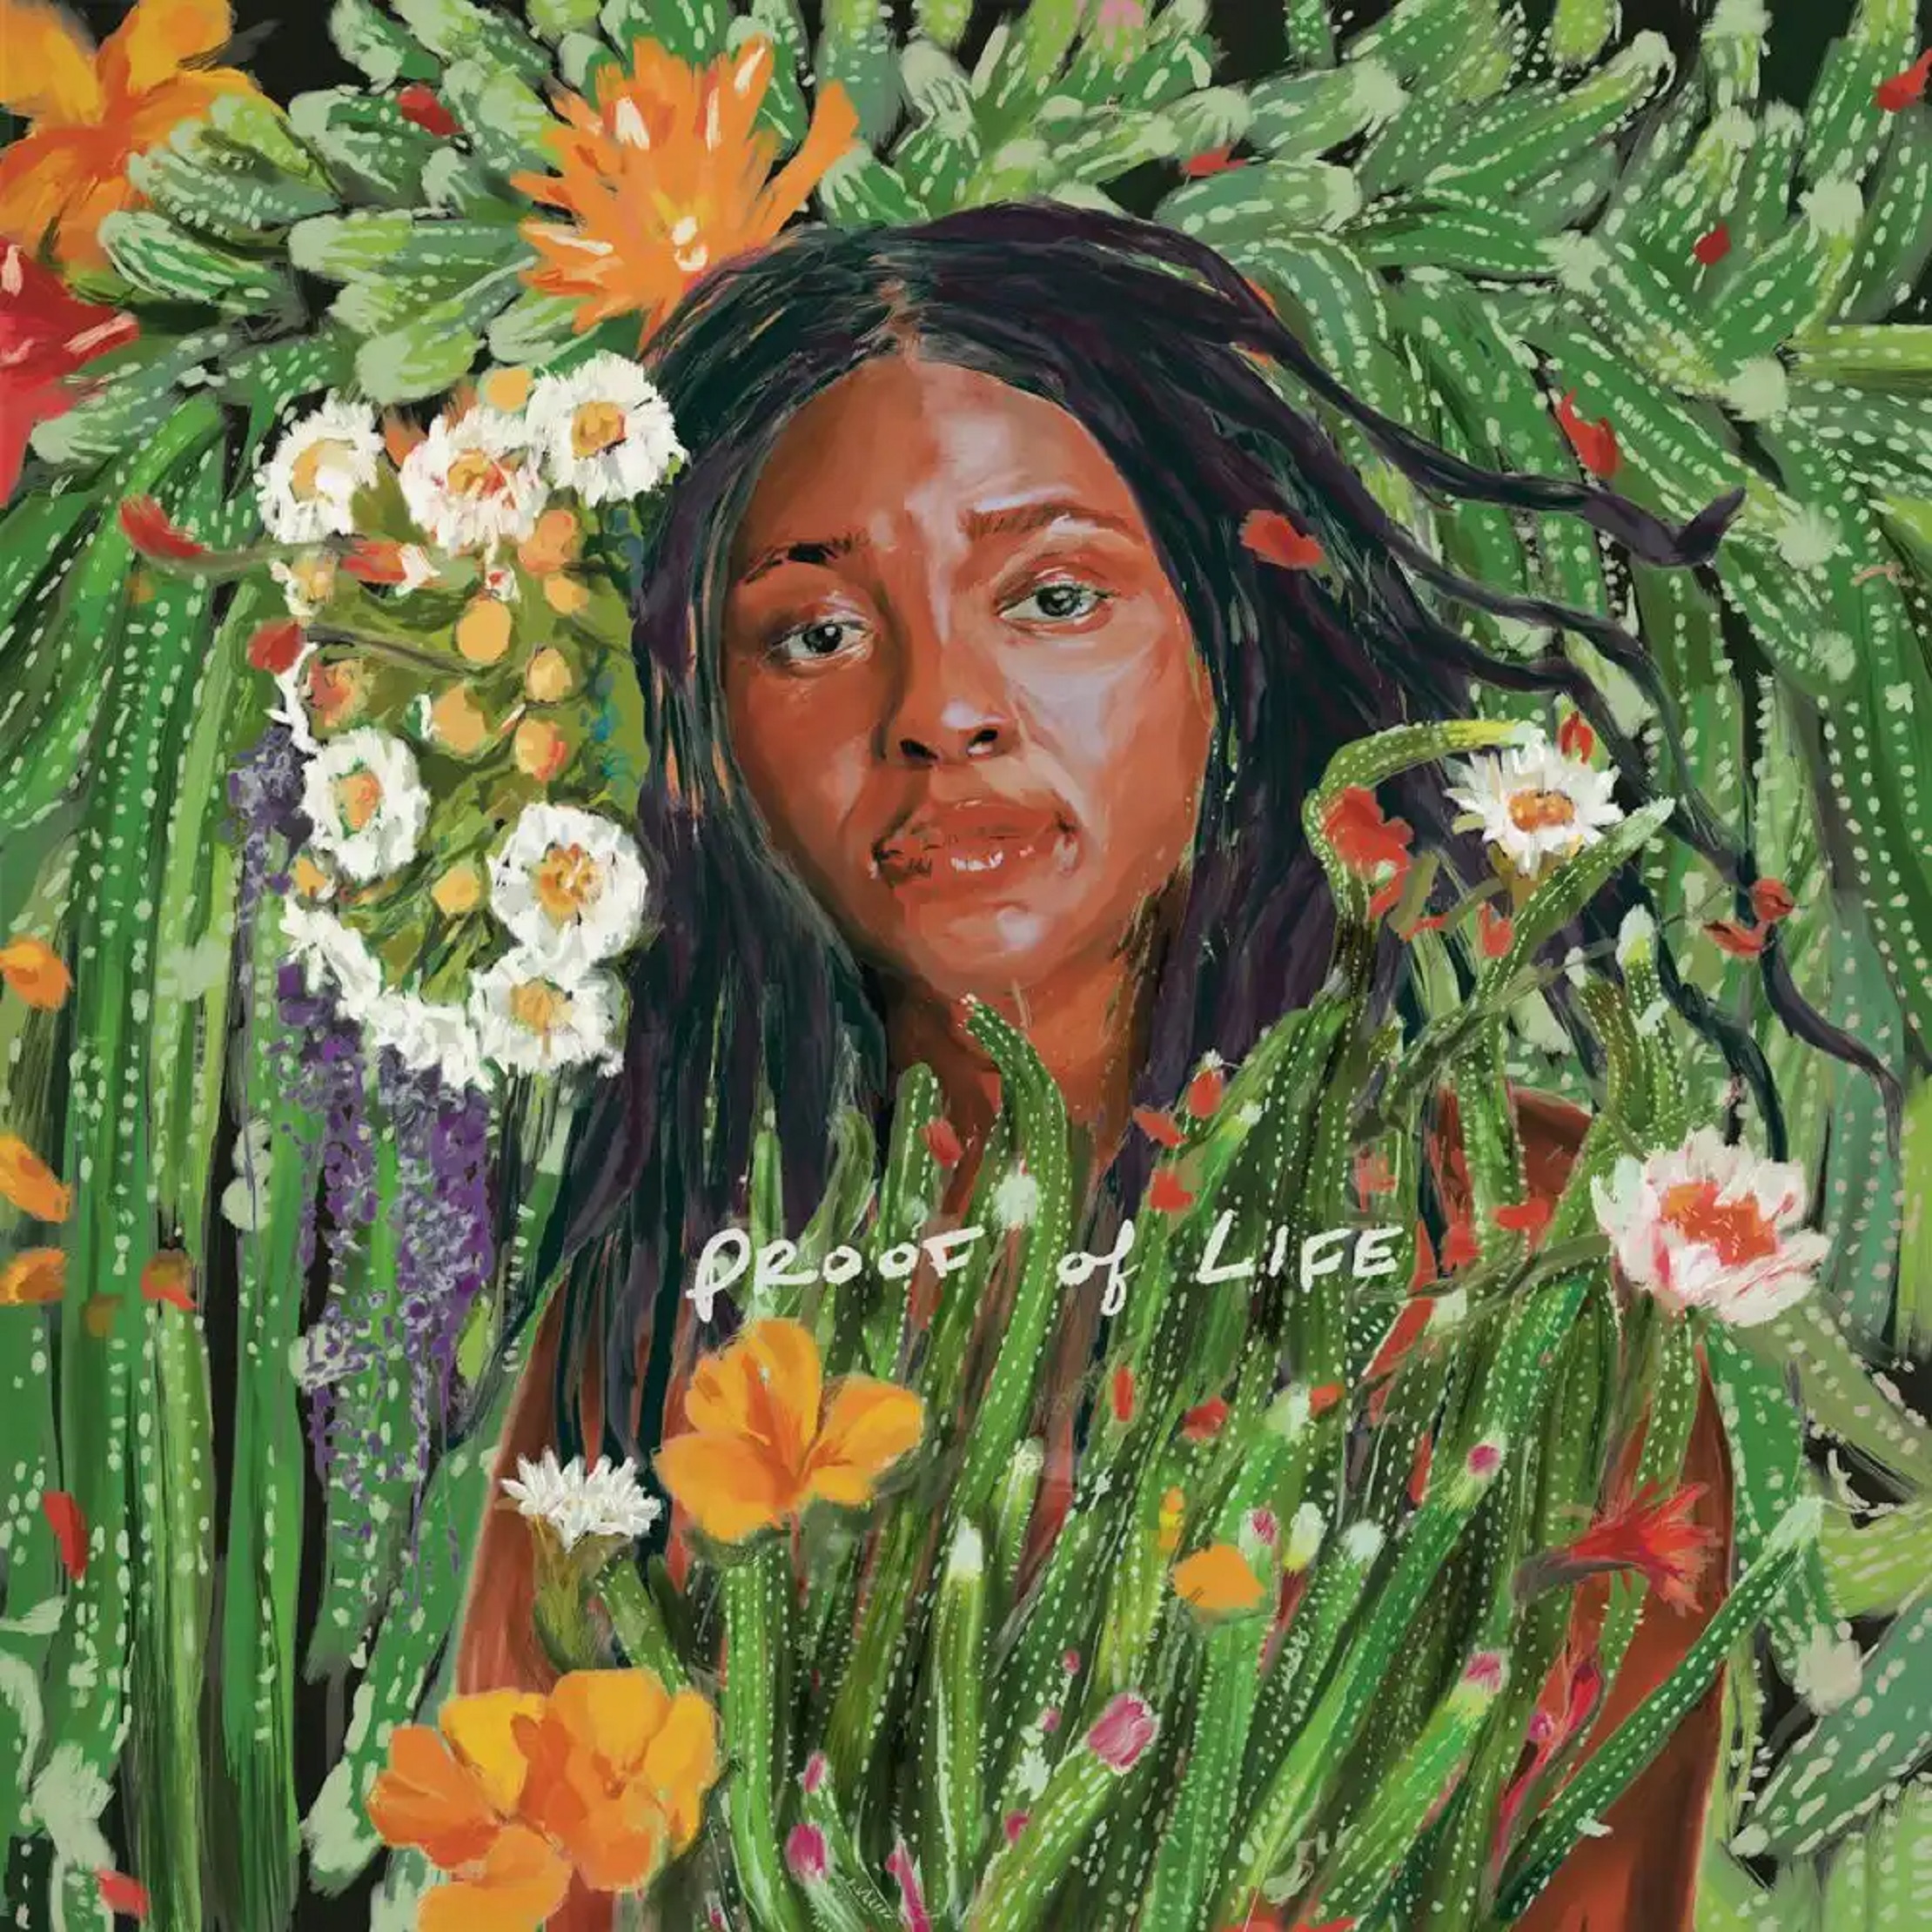 Joy Oladokun’s highly anticipated new album "Proof of Life" out April 28, first single “Changes” debuts today